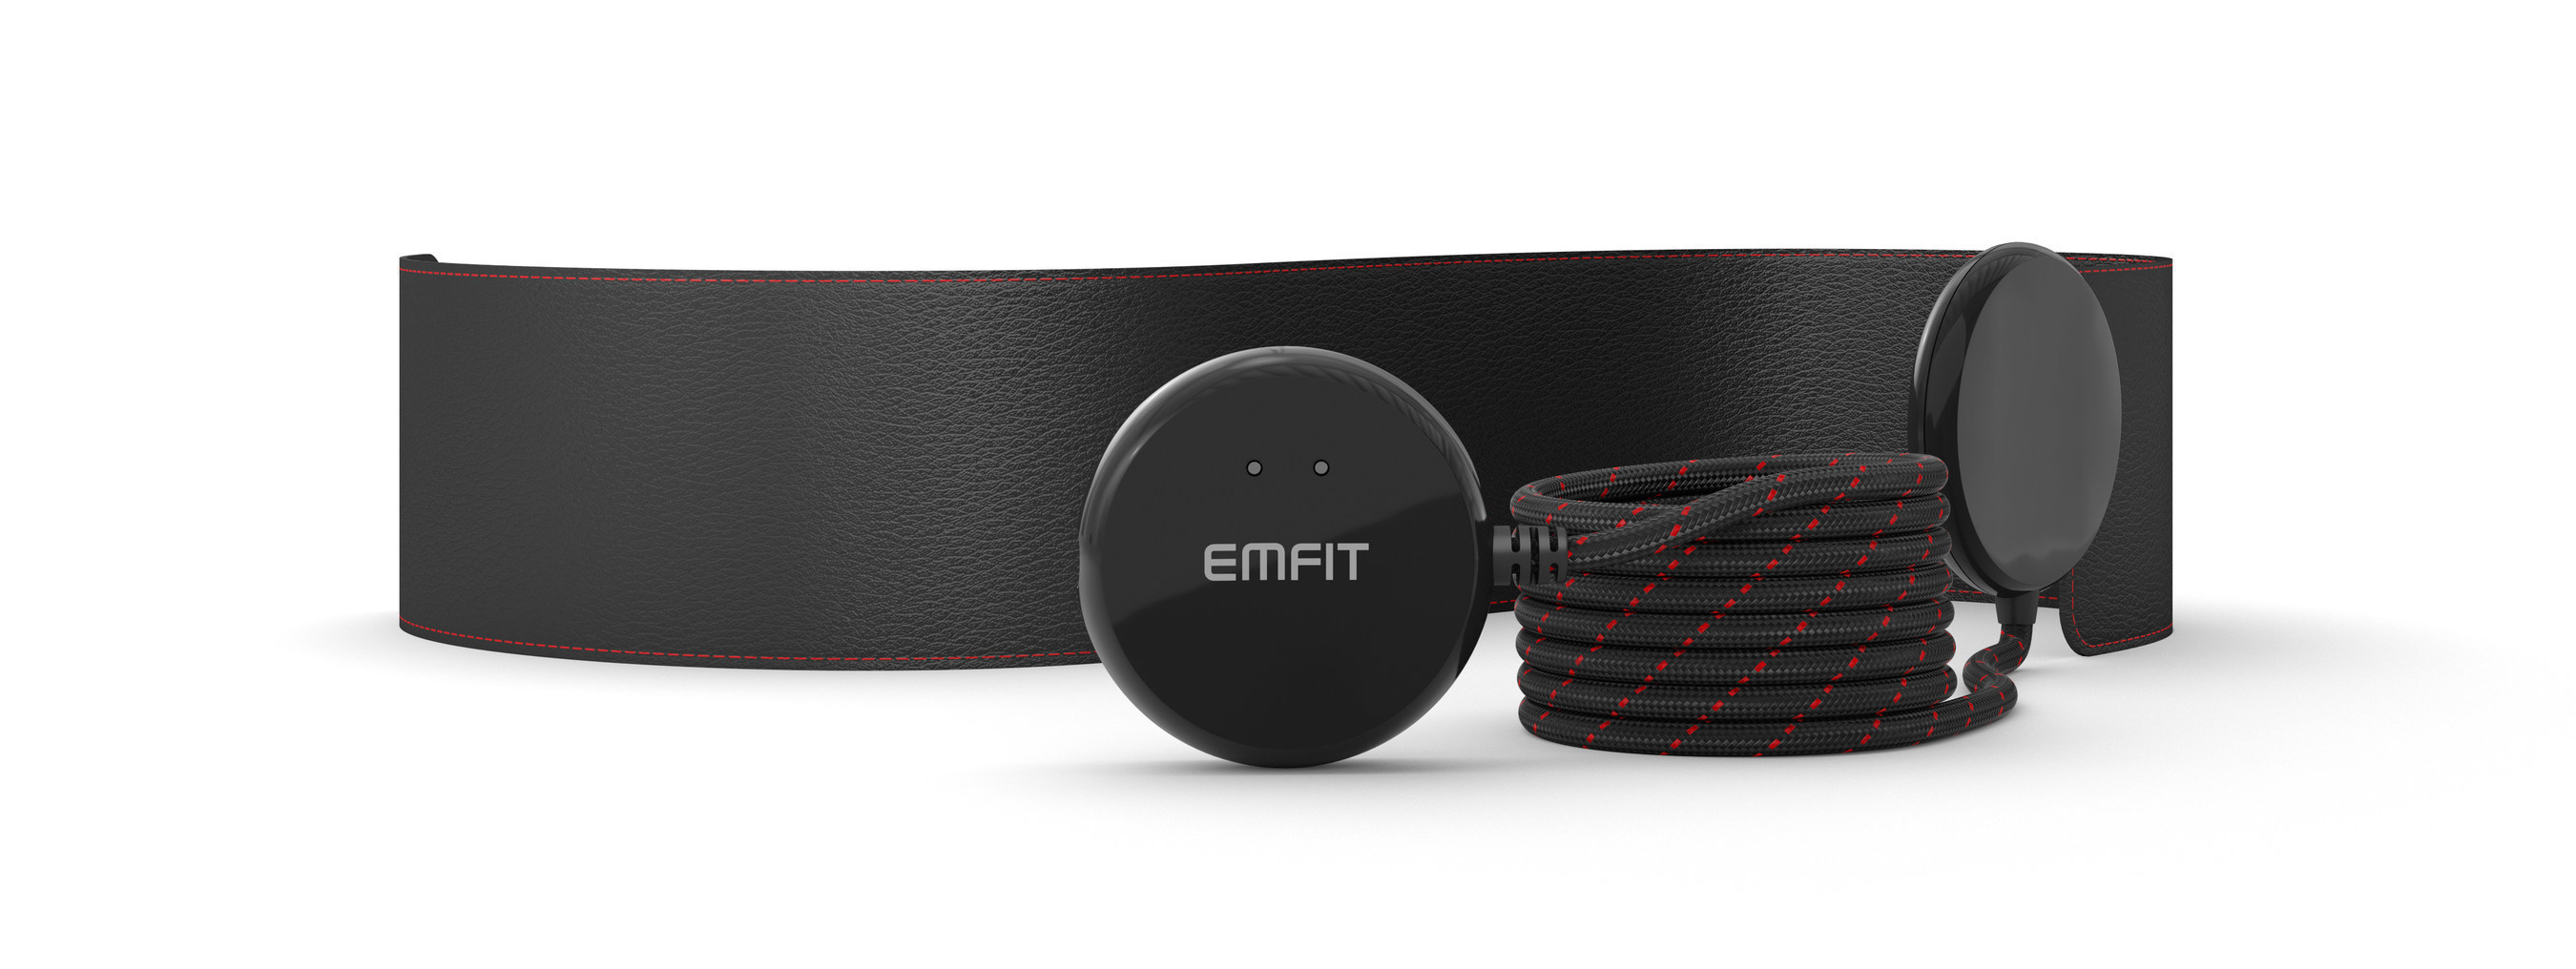 Emfit QS consists of a contact-free, passive sensor that is installed beneath the mattress and a small circular module that does signal acquisition and transmission. The module connects to Wi-Fi and a long cable allows device to be placed far from user to avoid any disturbance to sleep. Data is uploaded to Emfit server. Web-based application that is also optimised for use with smart phones provides comprehensive reports about physical recovery, fatigue, stress levels, and sleep quality.